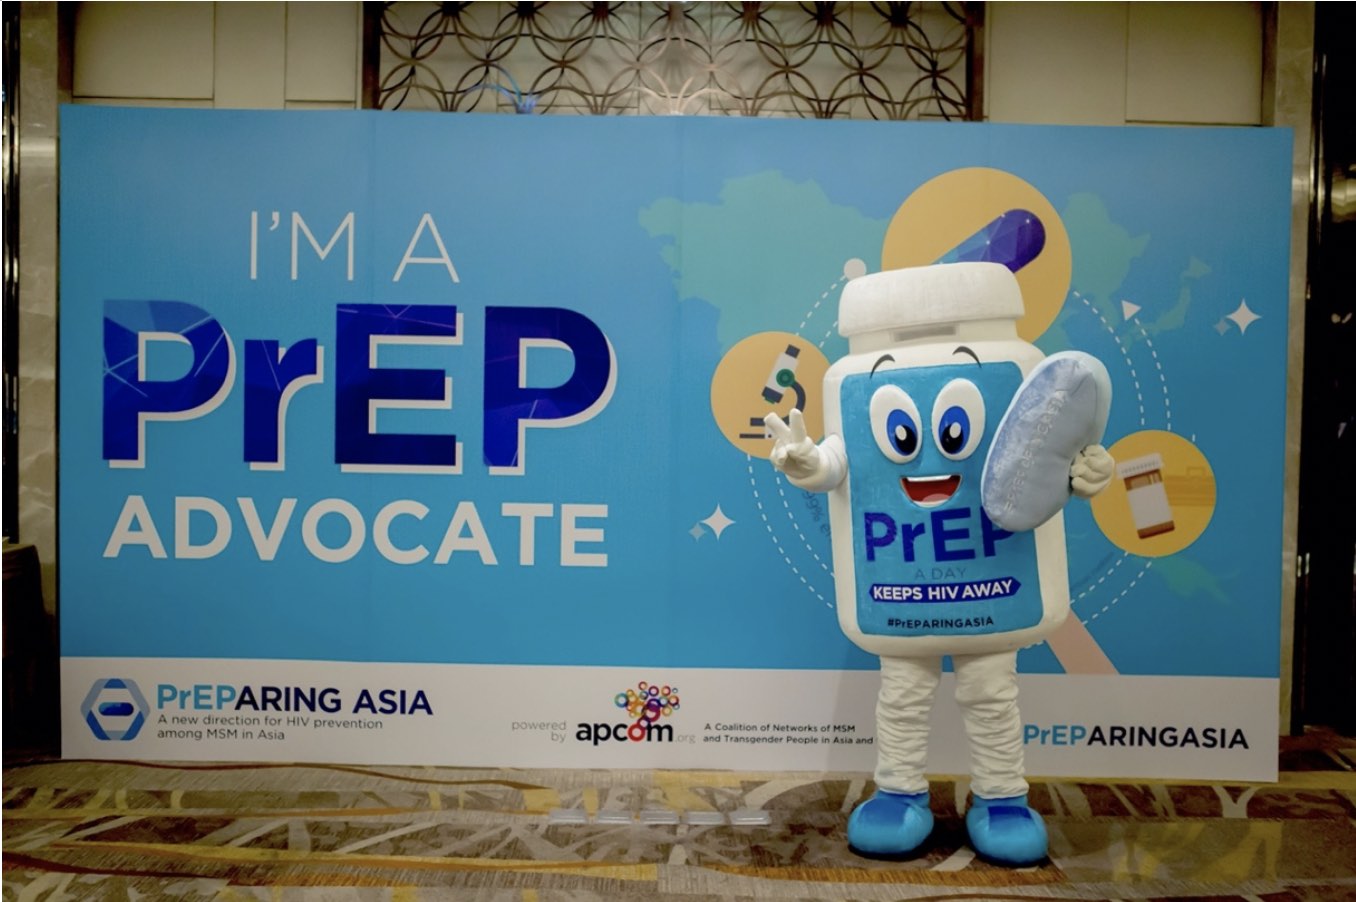 A picture of a cartoonish PrEP mascot, with text reading “PrEP a day keeps HIV away. The photo is from a conference titled “PrEParing Asia: A new direction for HIV prevention among MSM in Asia. Photo credit: APCOM Foundation – Asia-Pacific Coalition on Male Sexual Health.